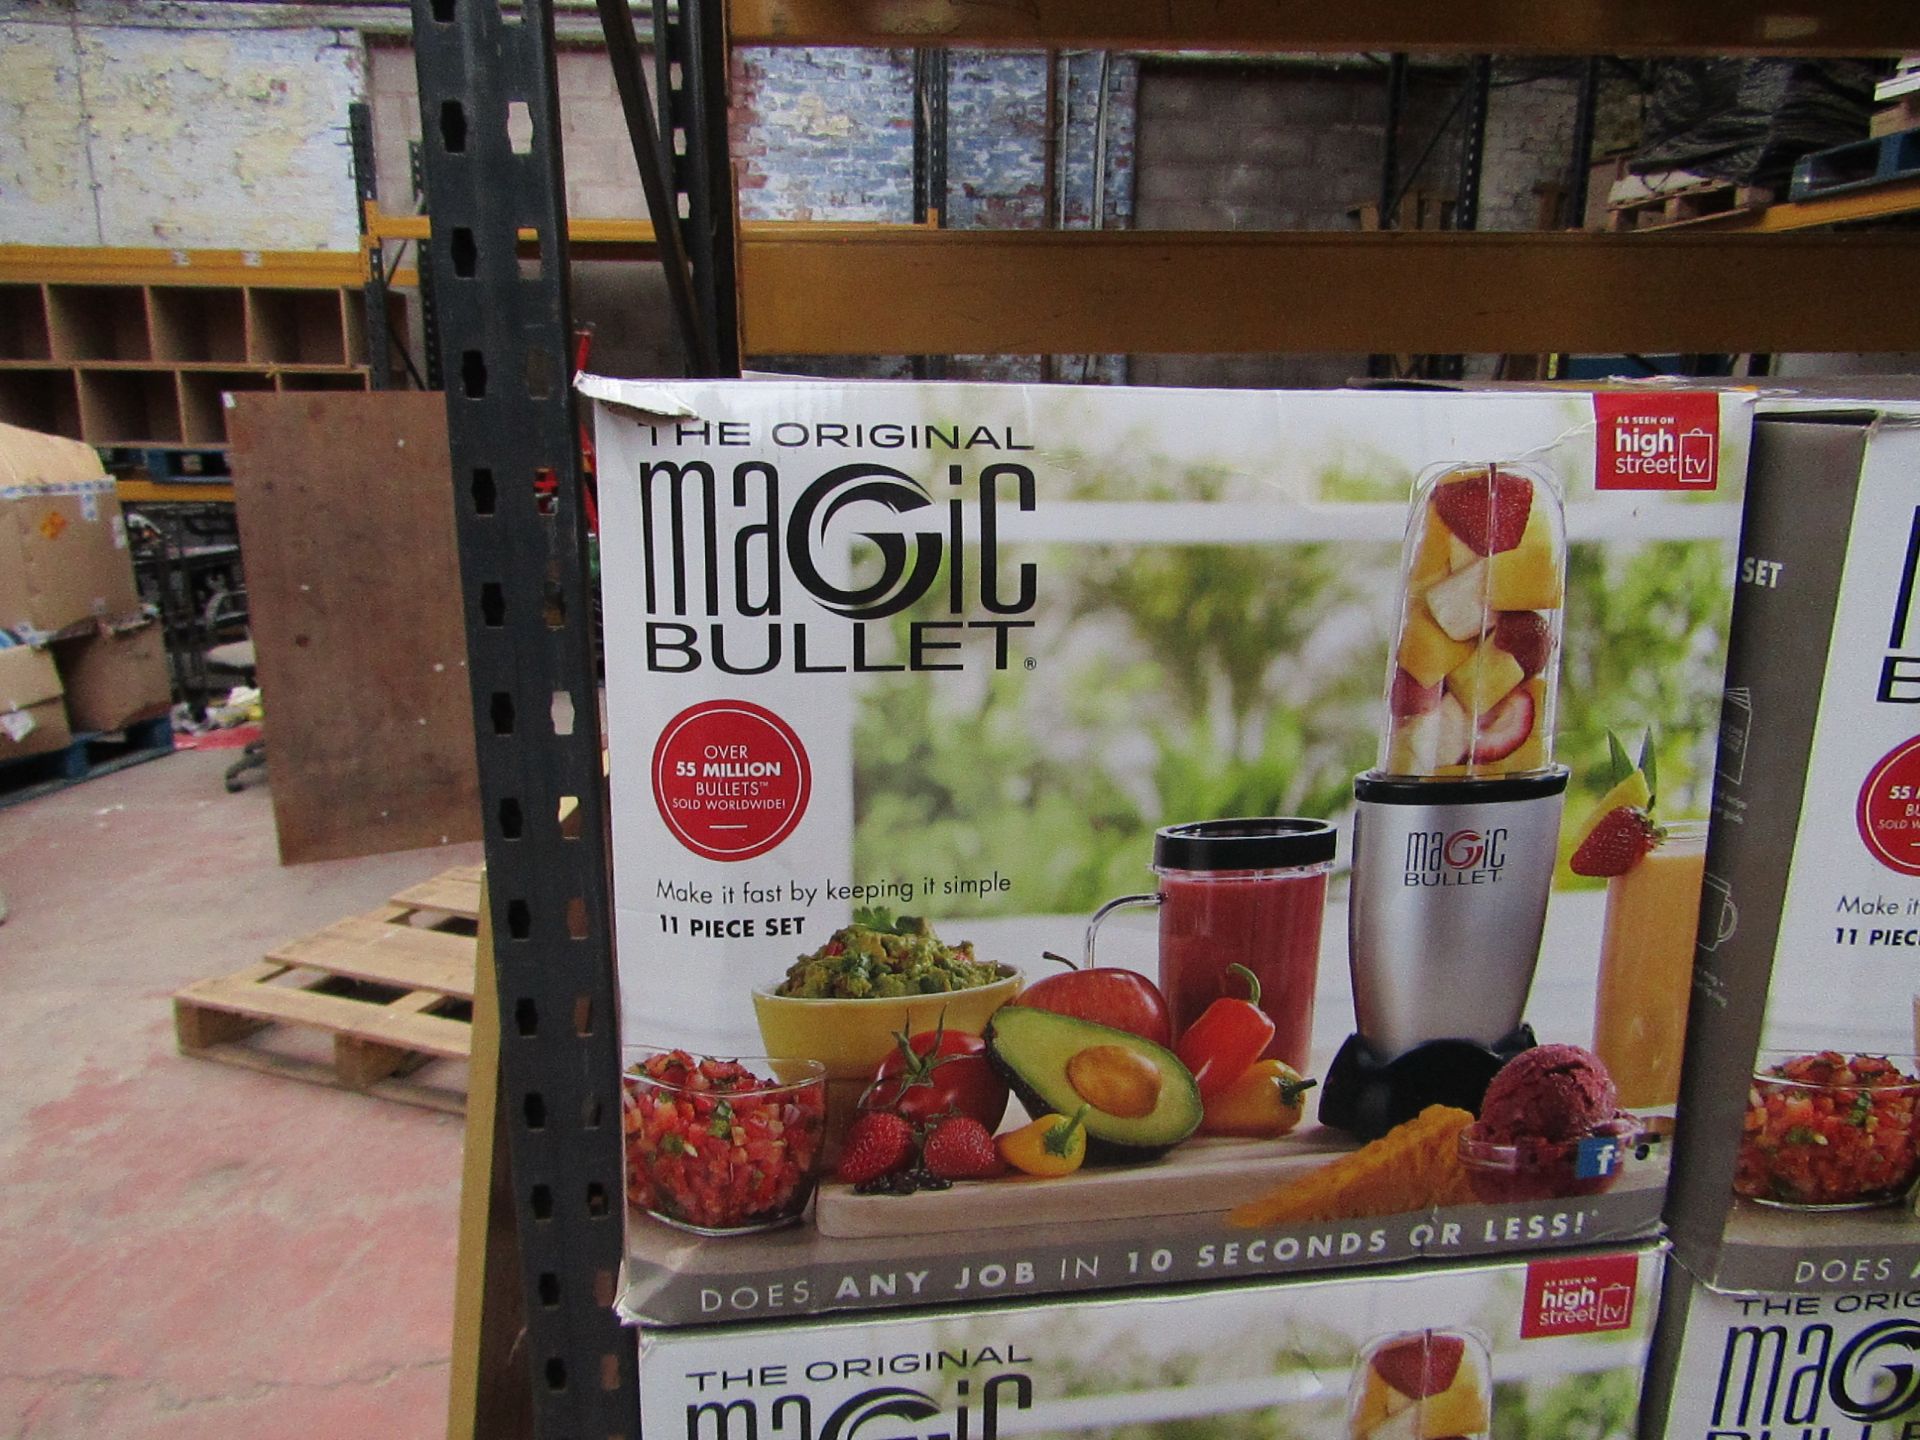 | 2X | MAGIC BULLET | TESTED WORKING AND BOXED | NO ONLINE RE-SALE | SKU C5060191467360 | RRP £39.99